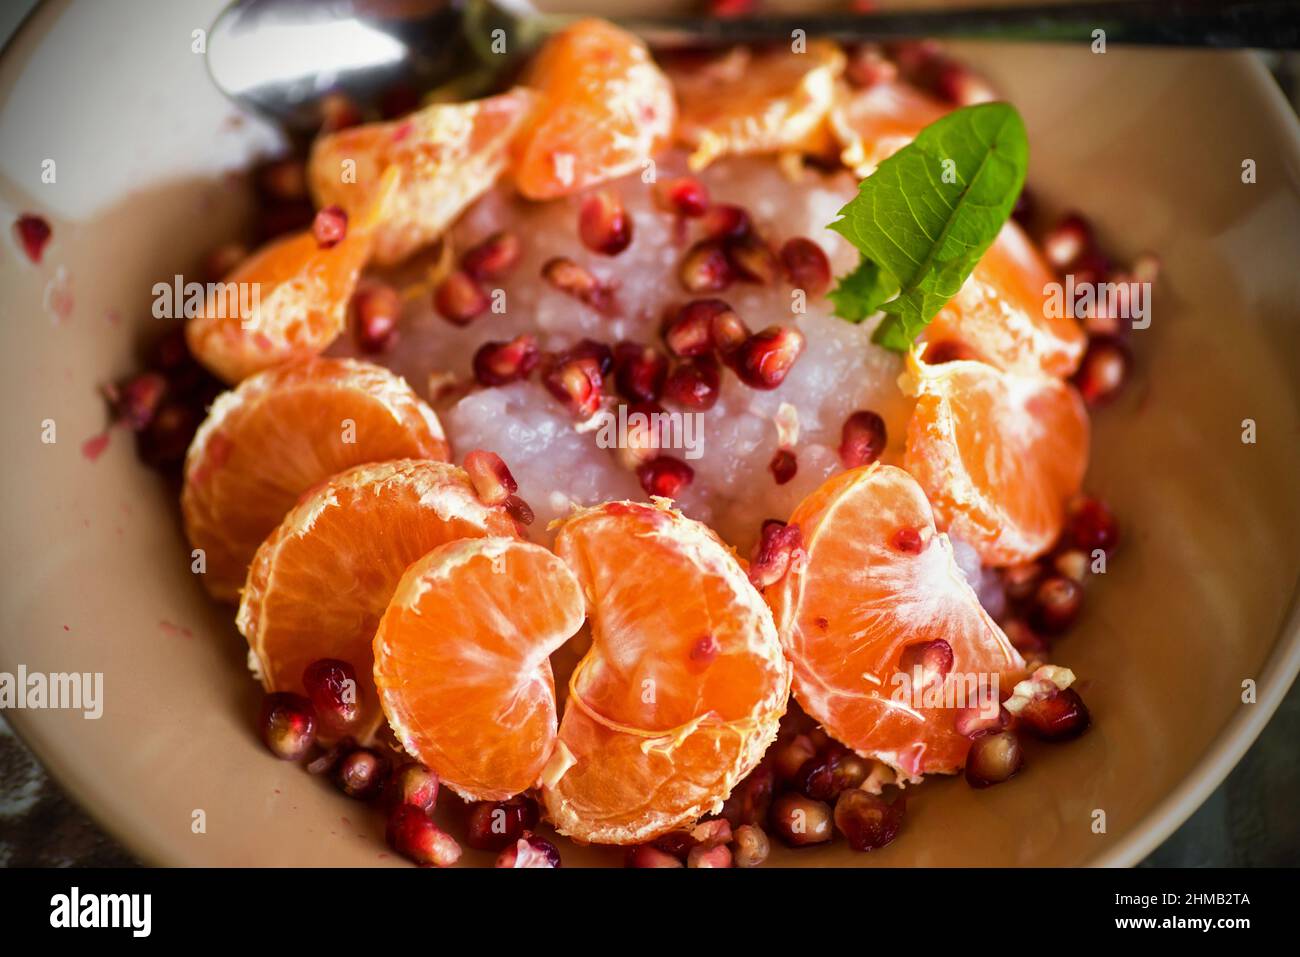 Tapioca dessert with tangerine and pomegranate seed in bowl, closeup. Stock Photo